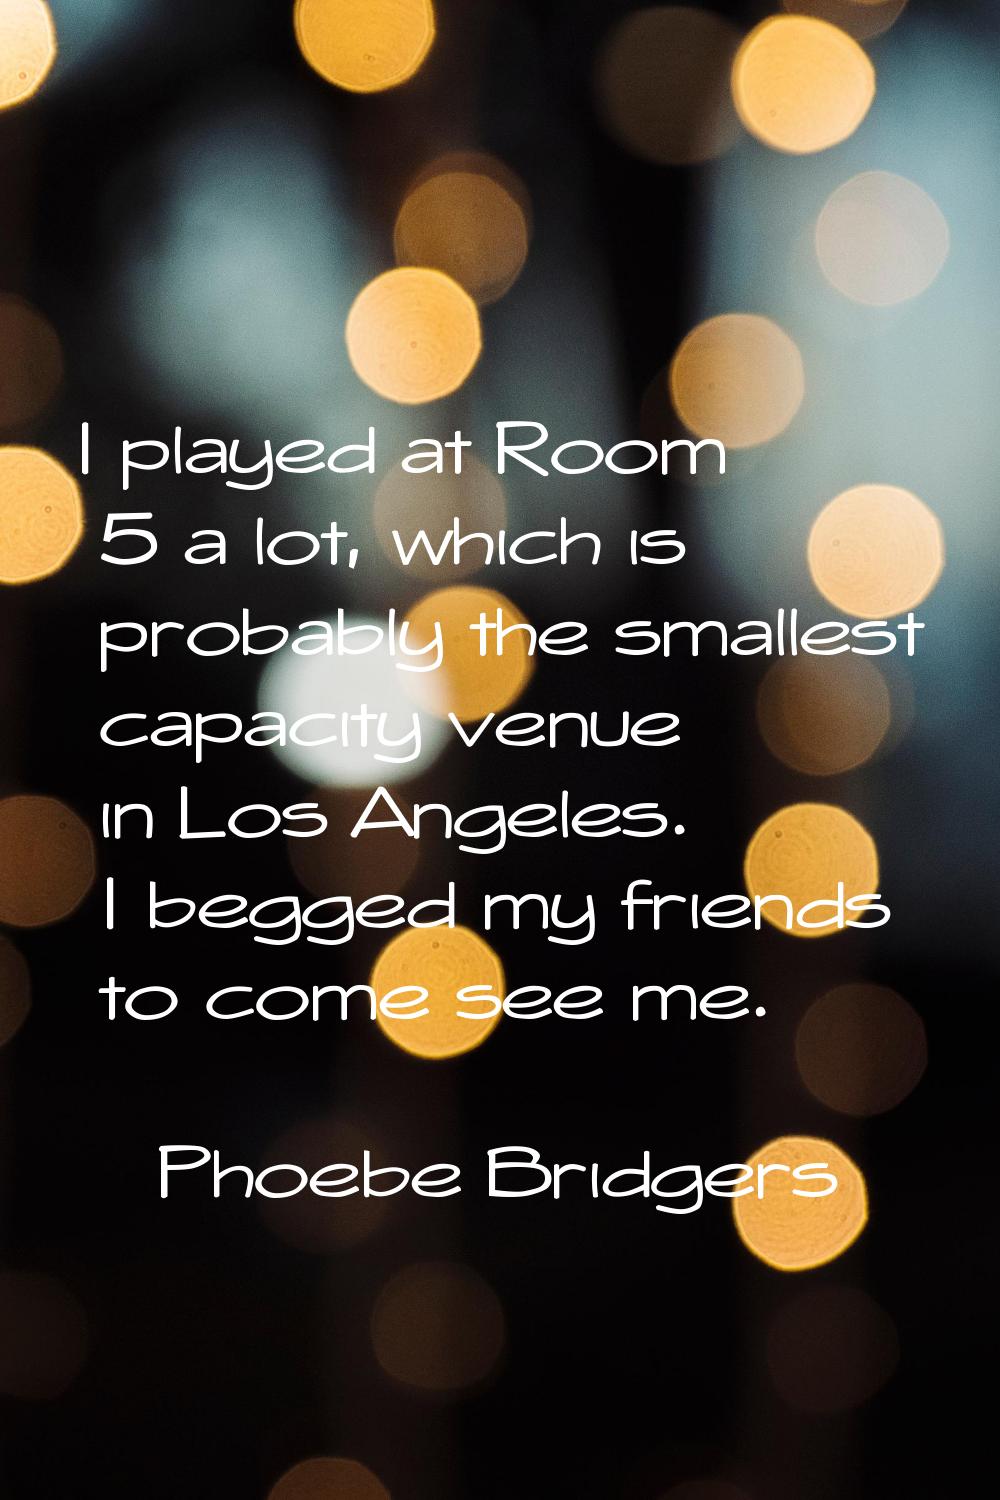 I played at Room 5 a lot, which is probably the smallest capacity venue in Los Angeles. I begged my